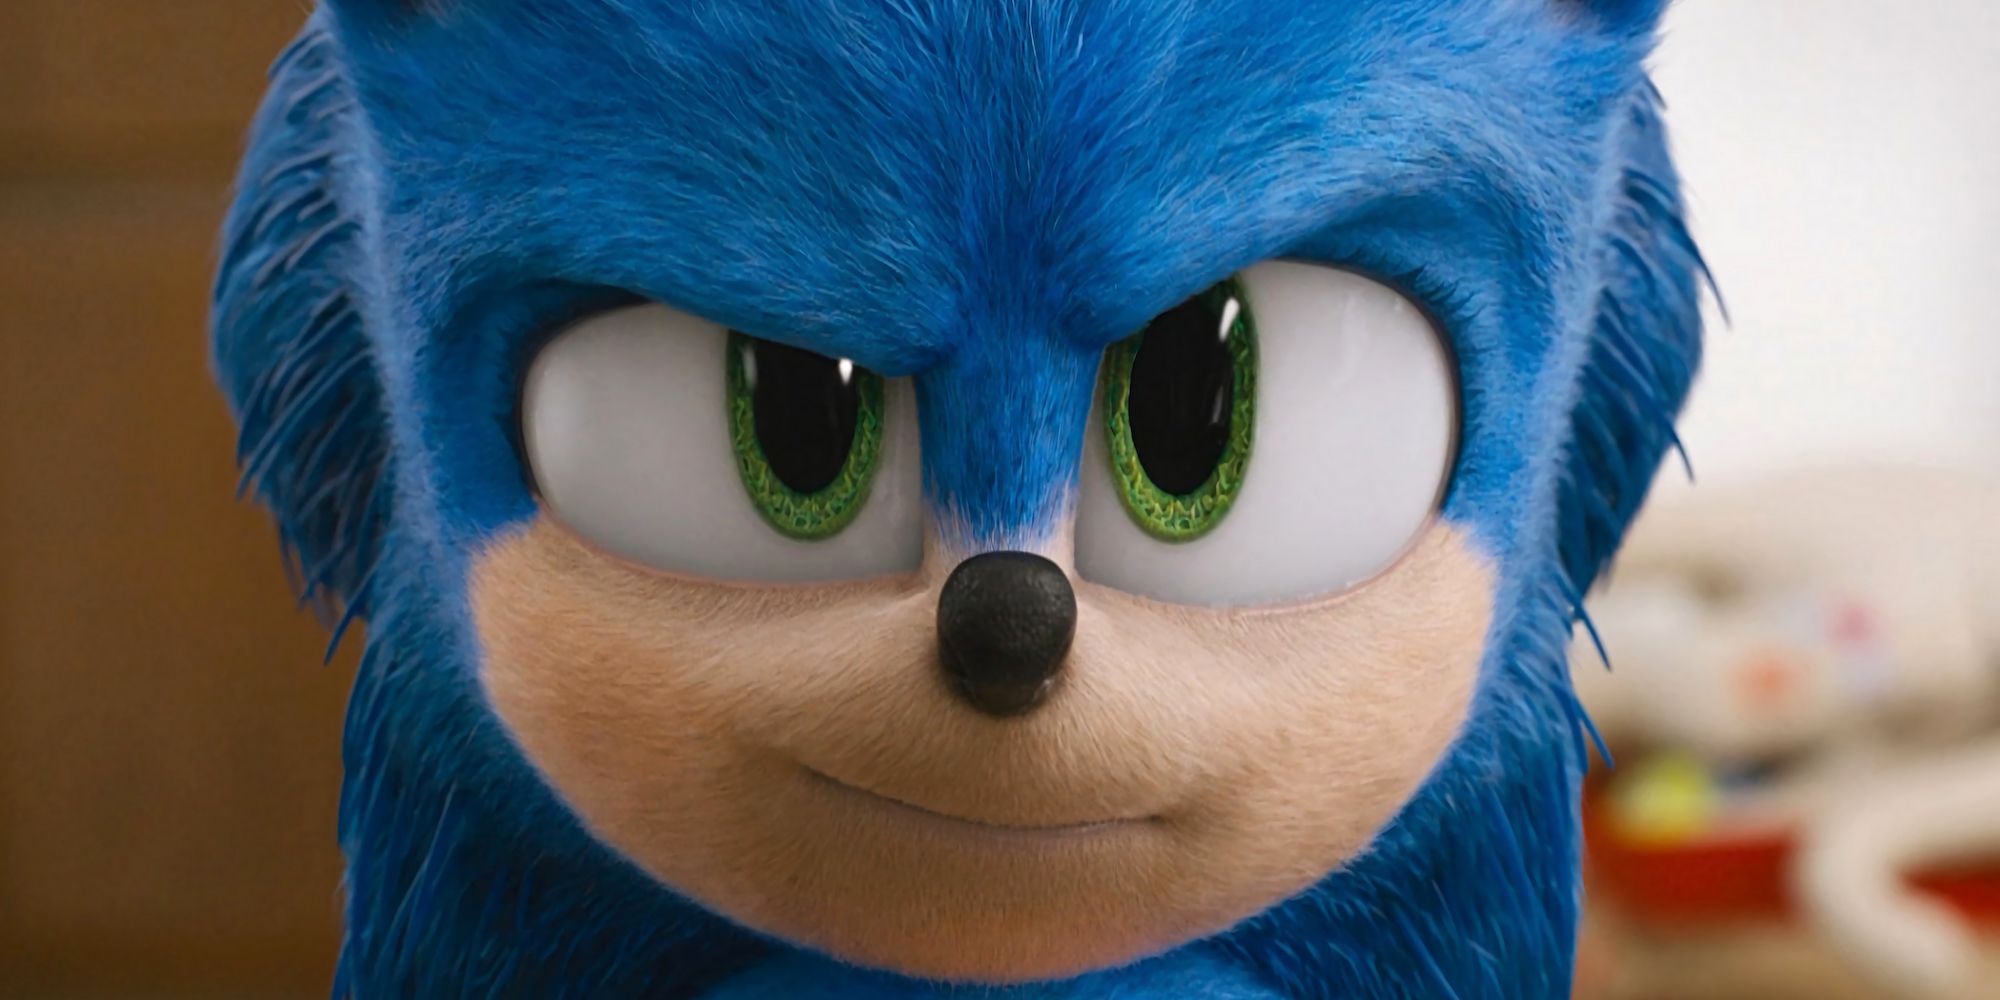 Sonic The Hedgehog 2 Is In Development At Paramount